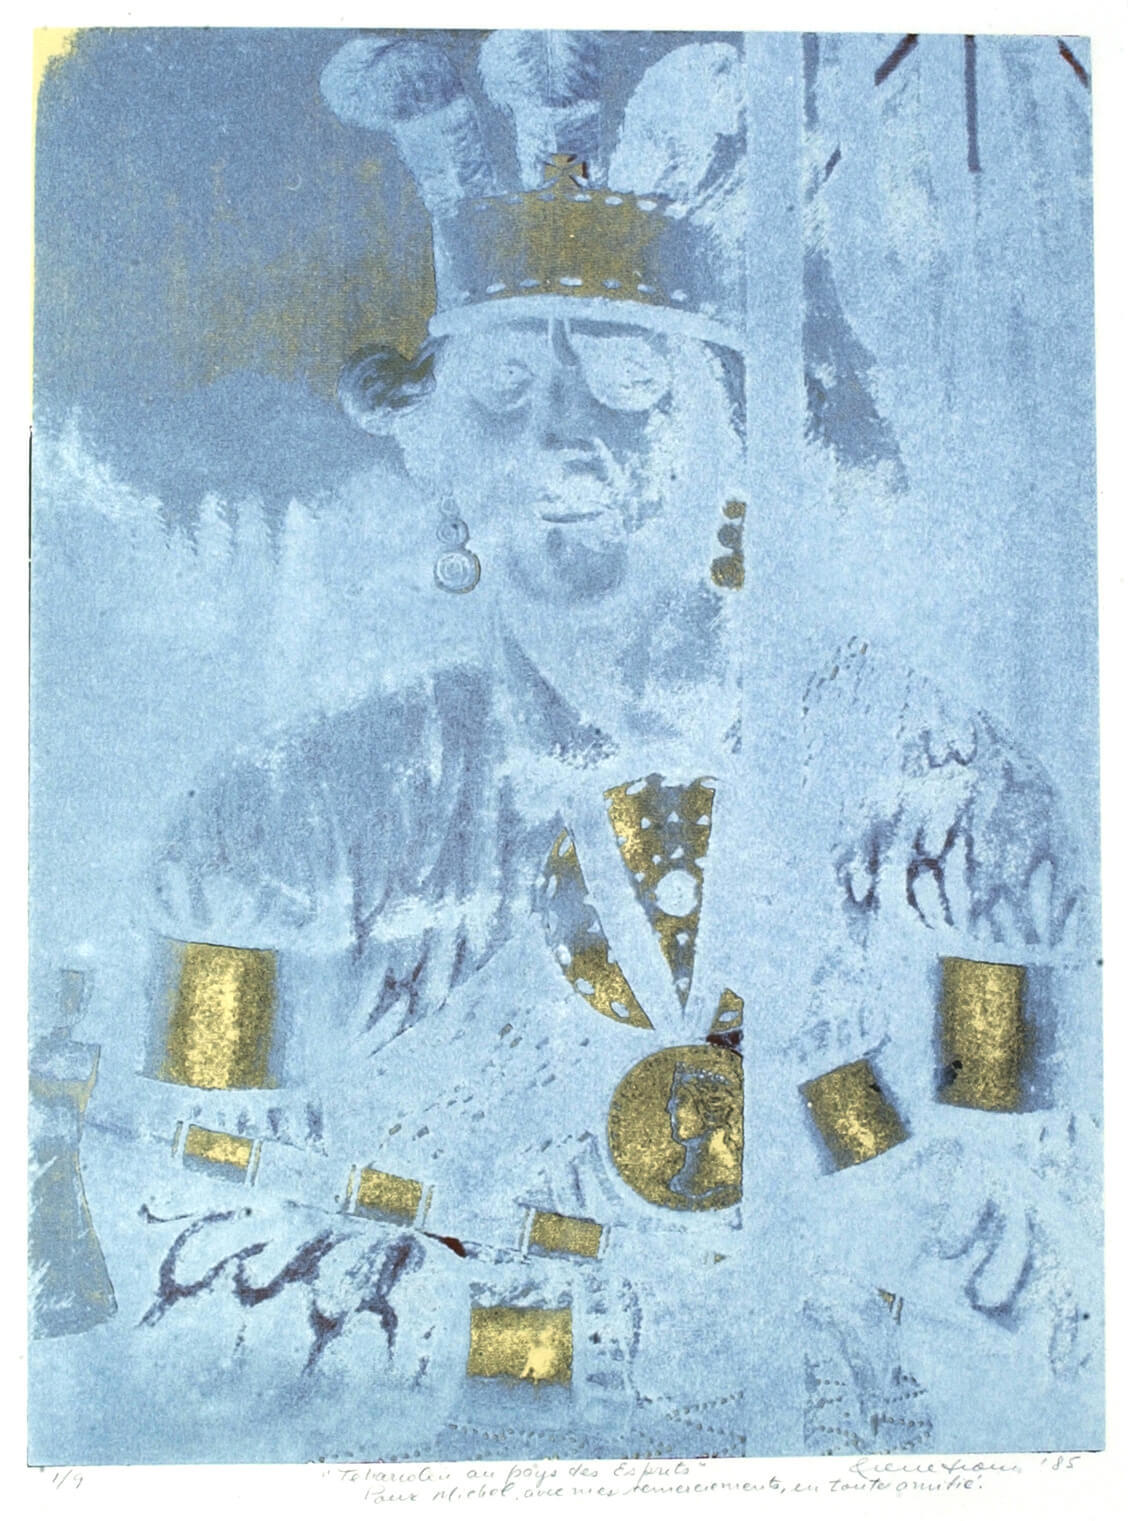 Art Canada Institute, Zacharie Vincent, Tehariolui in the Land of Spirits, 1985, by Pierre Sioui.